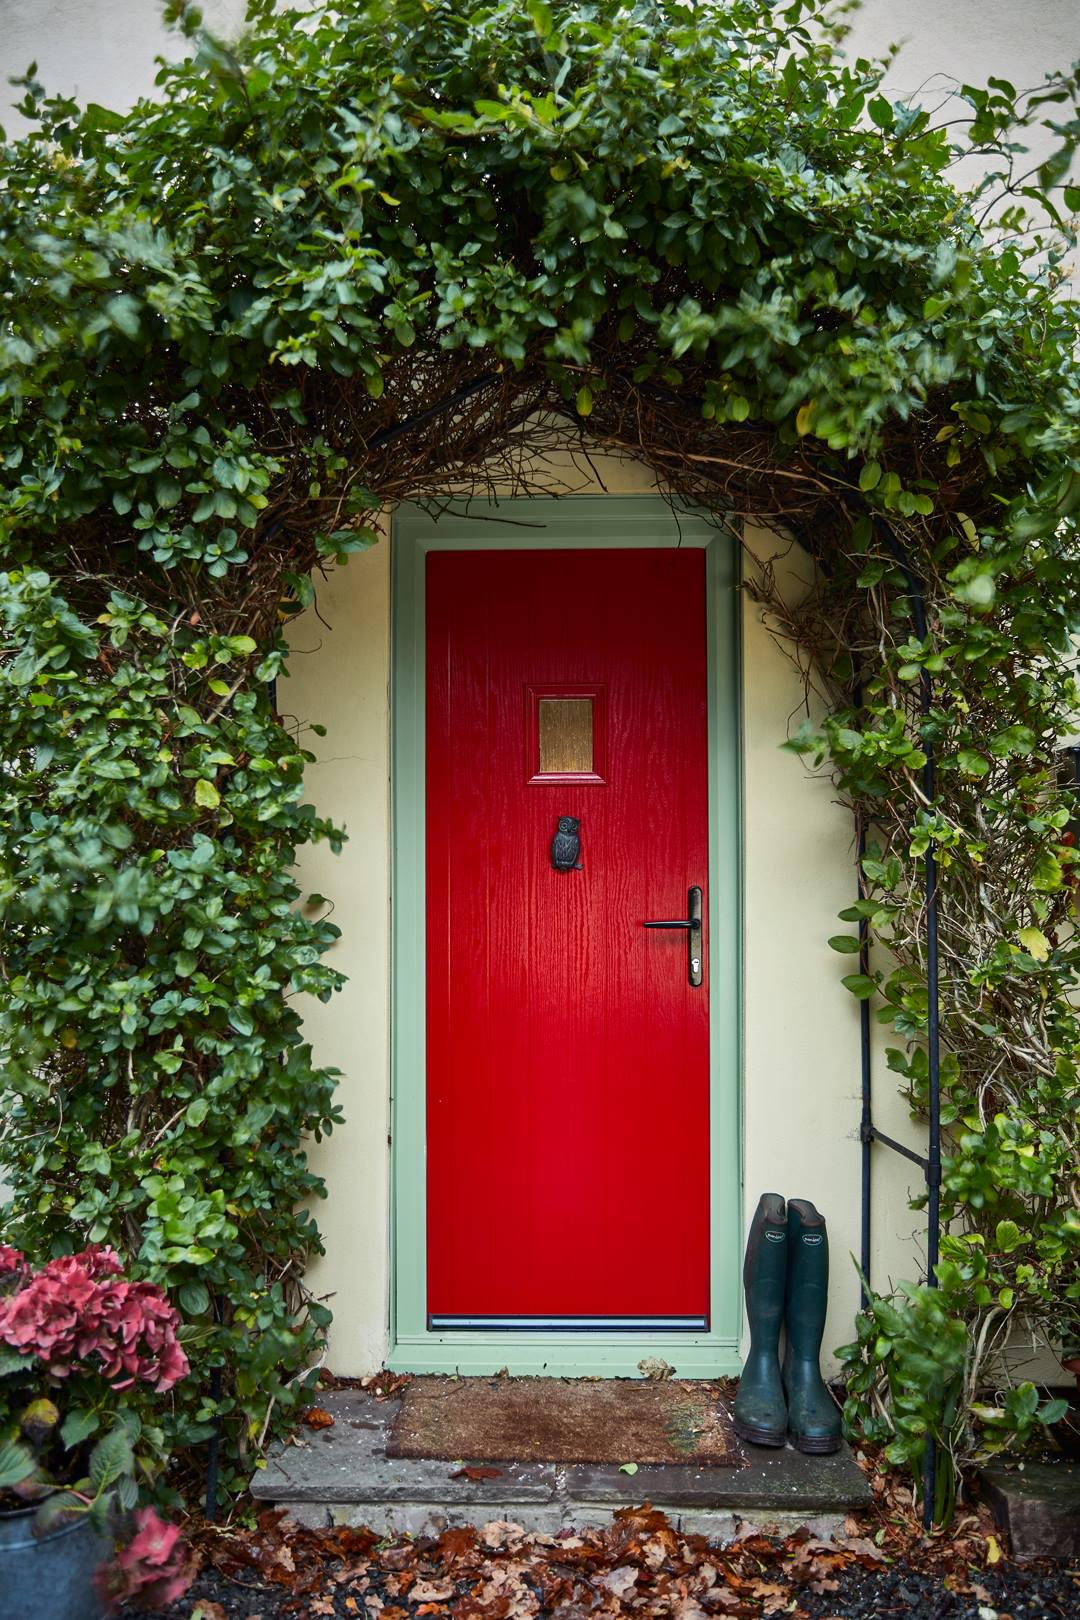 Find your perfect door from our Contemporary, Traditional and Cottage composite door styles. Customise your chosen design with a generous selection of colours, door furniture and glass options to find the perfect look for your home.